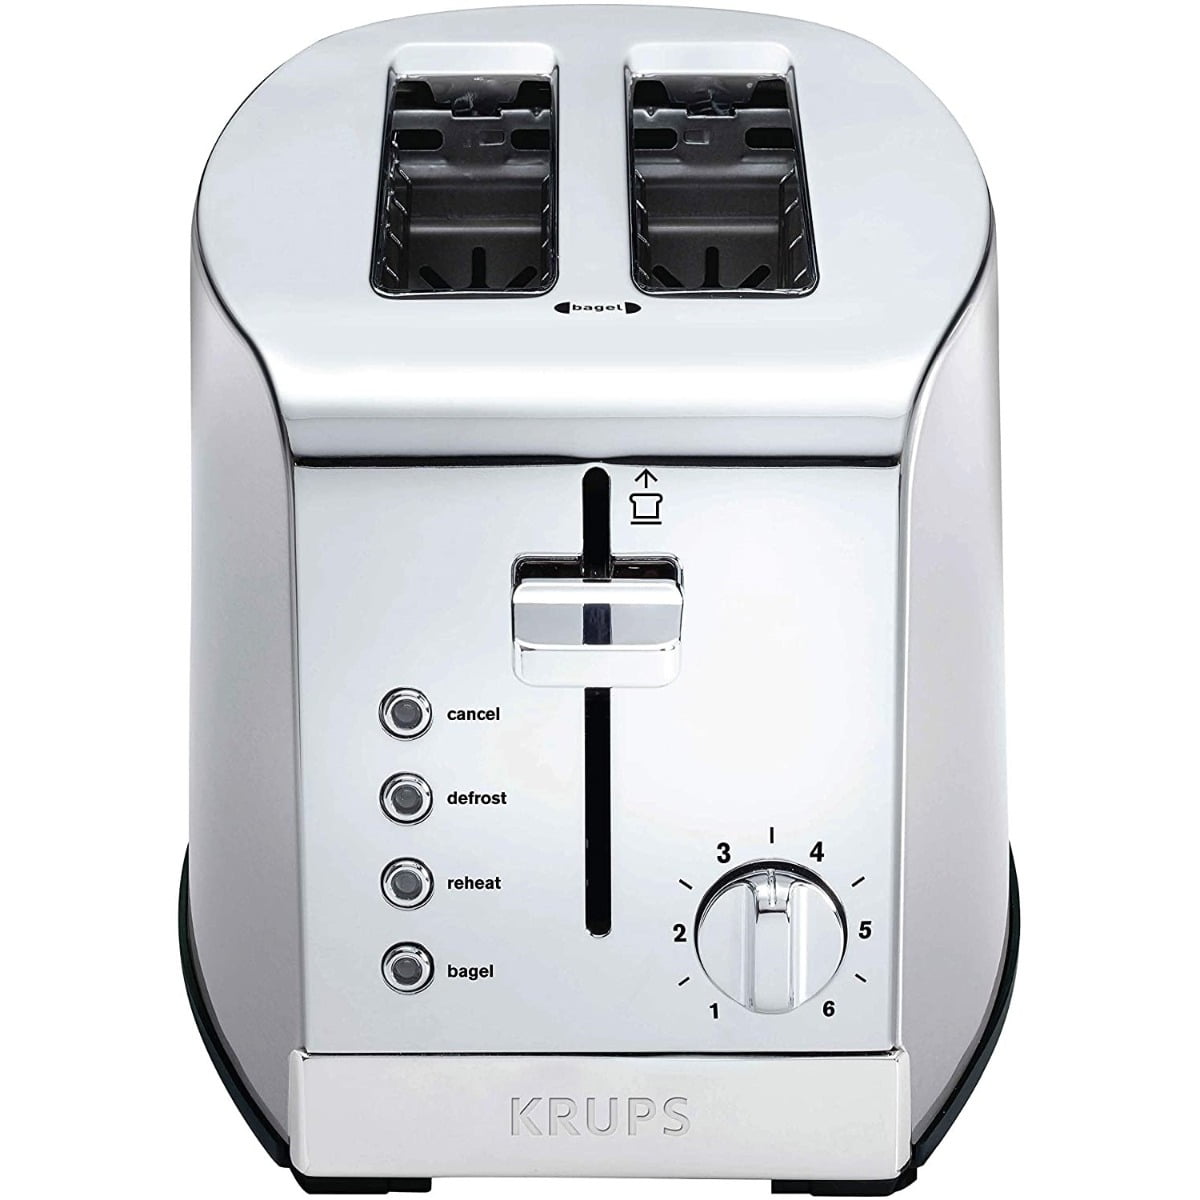 Krups Stainless Steel 4 Slice Toaster KH734D51 - The Home Depot